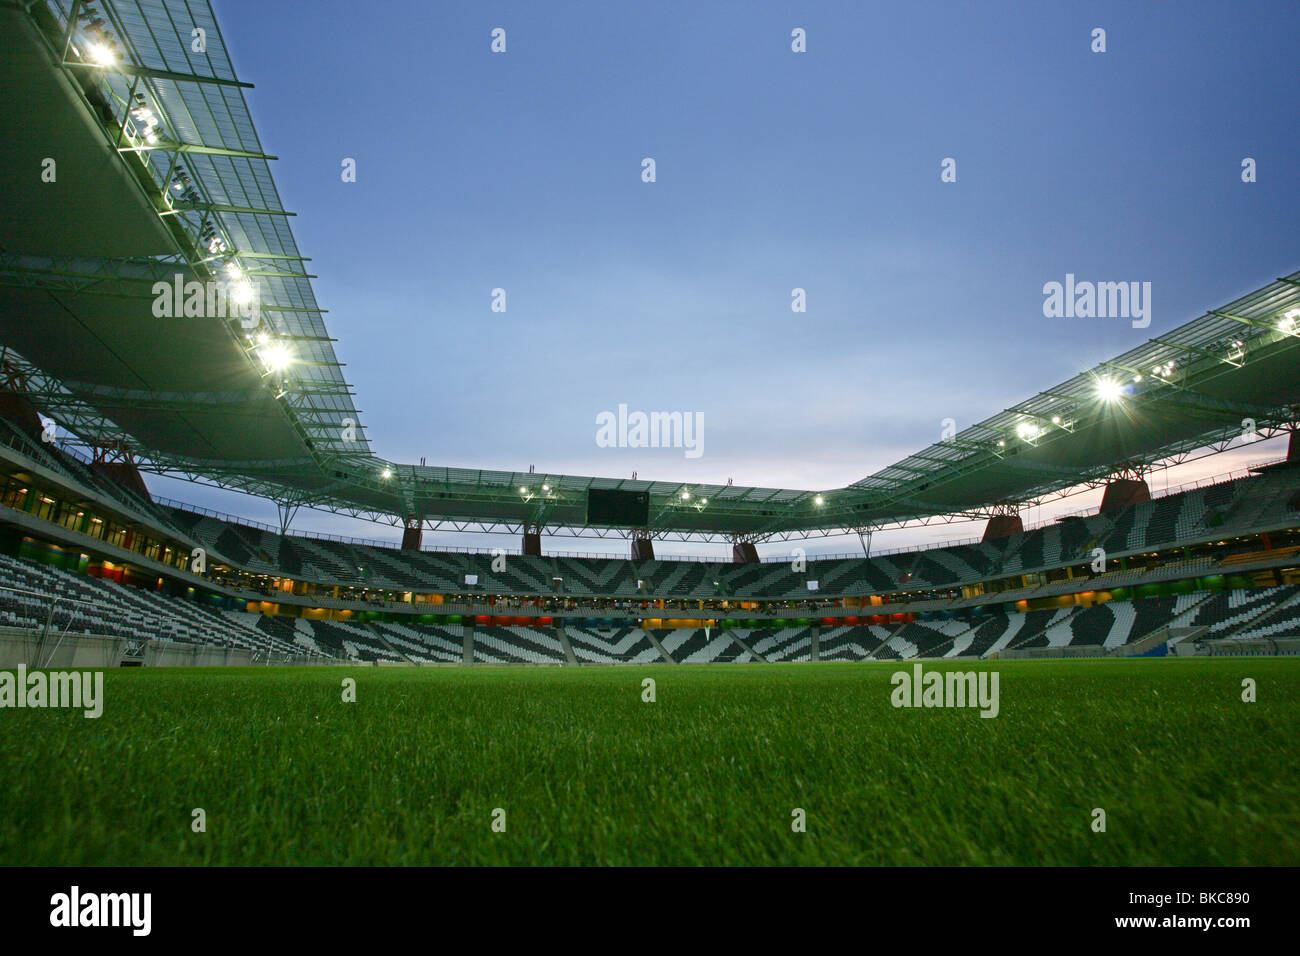 Interior of the Mbombela stadium In Nelspruit  at dusk showing the zebra-striped seating an a lush, green, playing surface Stock Photo